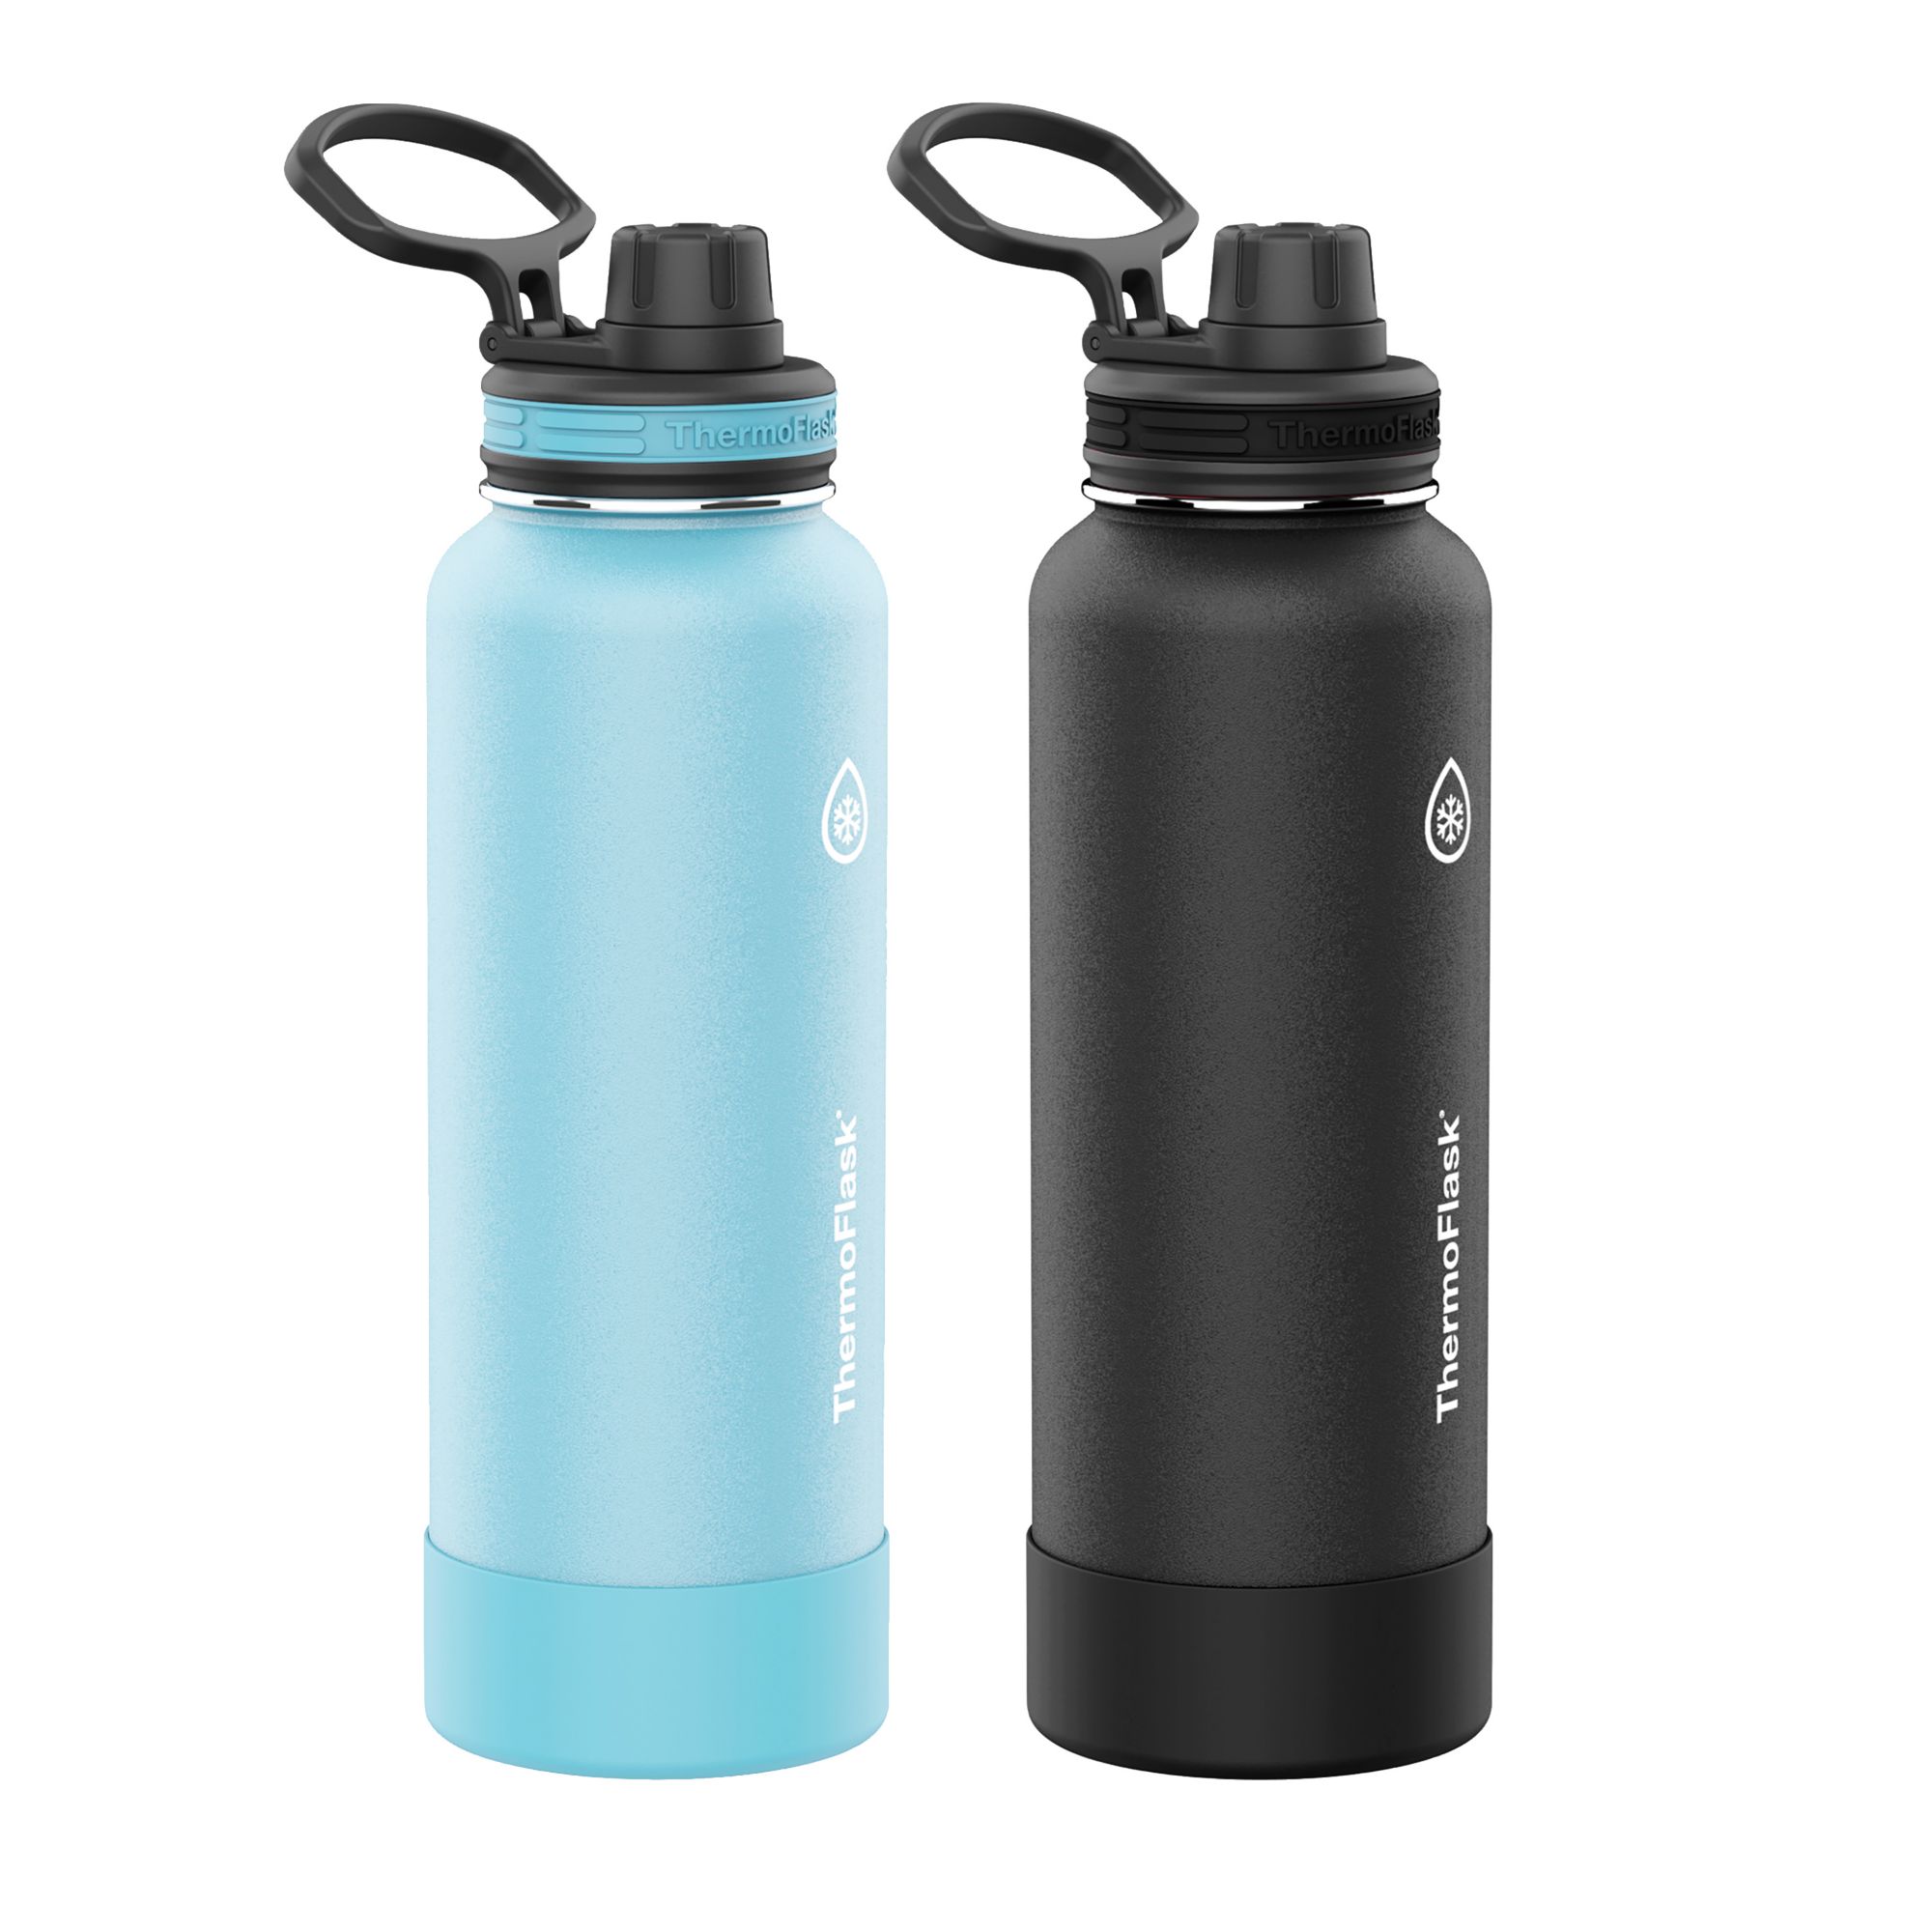 Save on Thermos Vacuum Insulated Beverage Bottle 40 oz Order